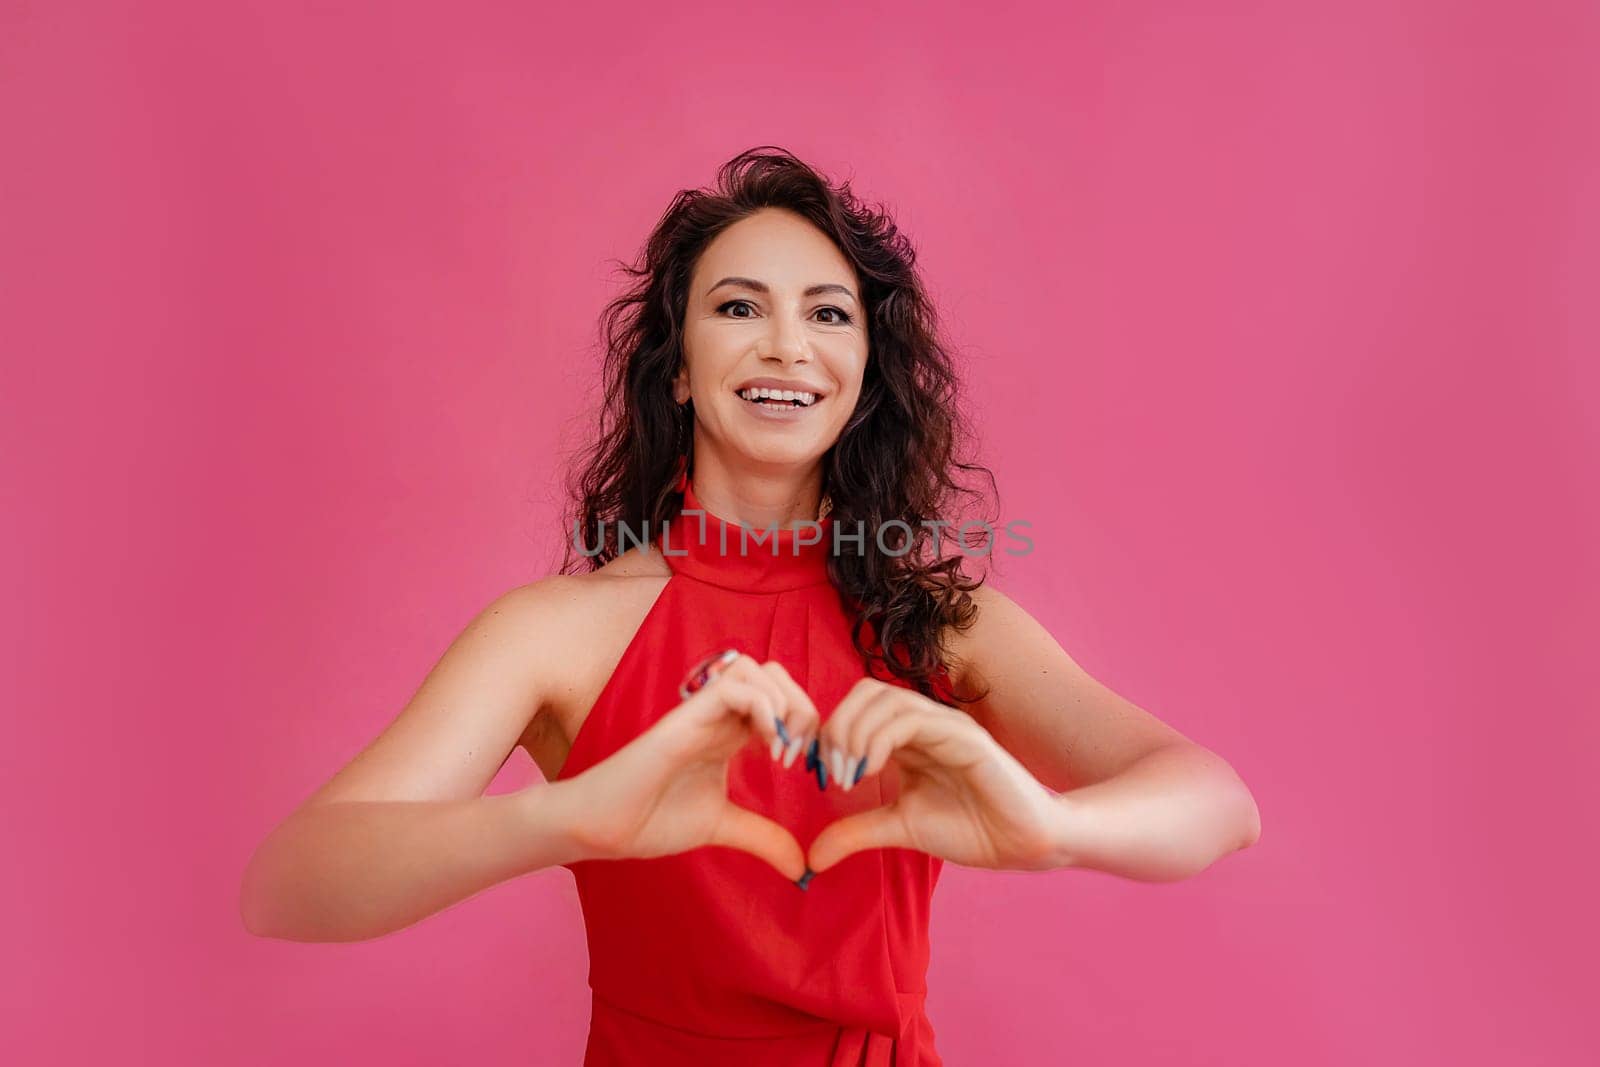 A woman in a red dress is smiling and holding her hands together to make a heart shape. Concept of love and happiness